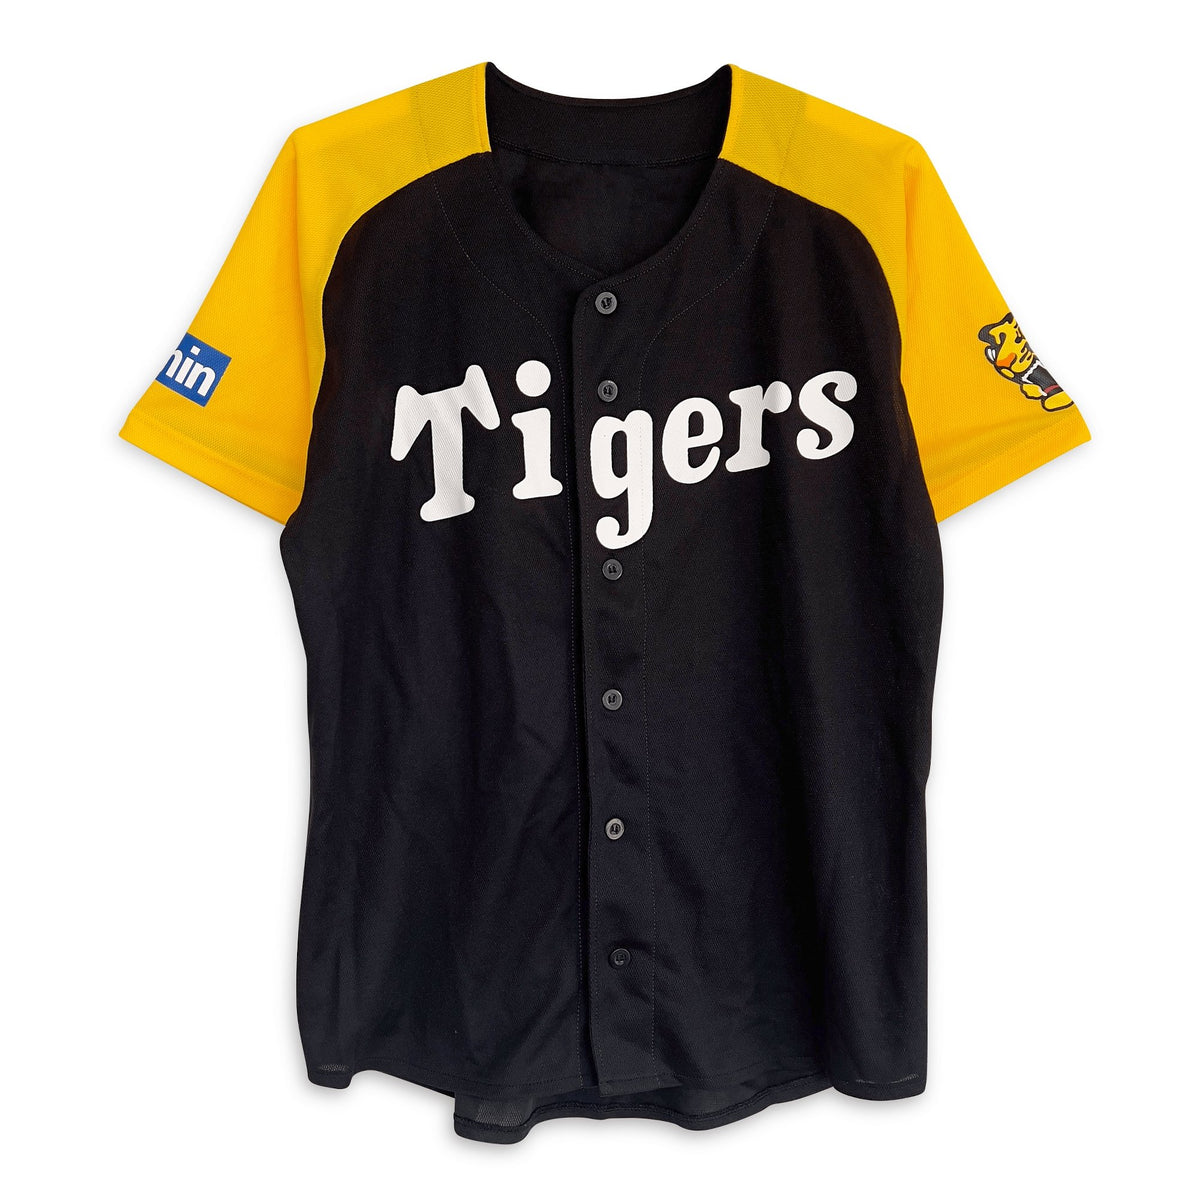 Tigers pleased with new jersey's old school look, Sports